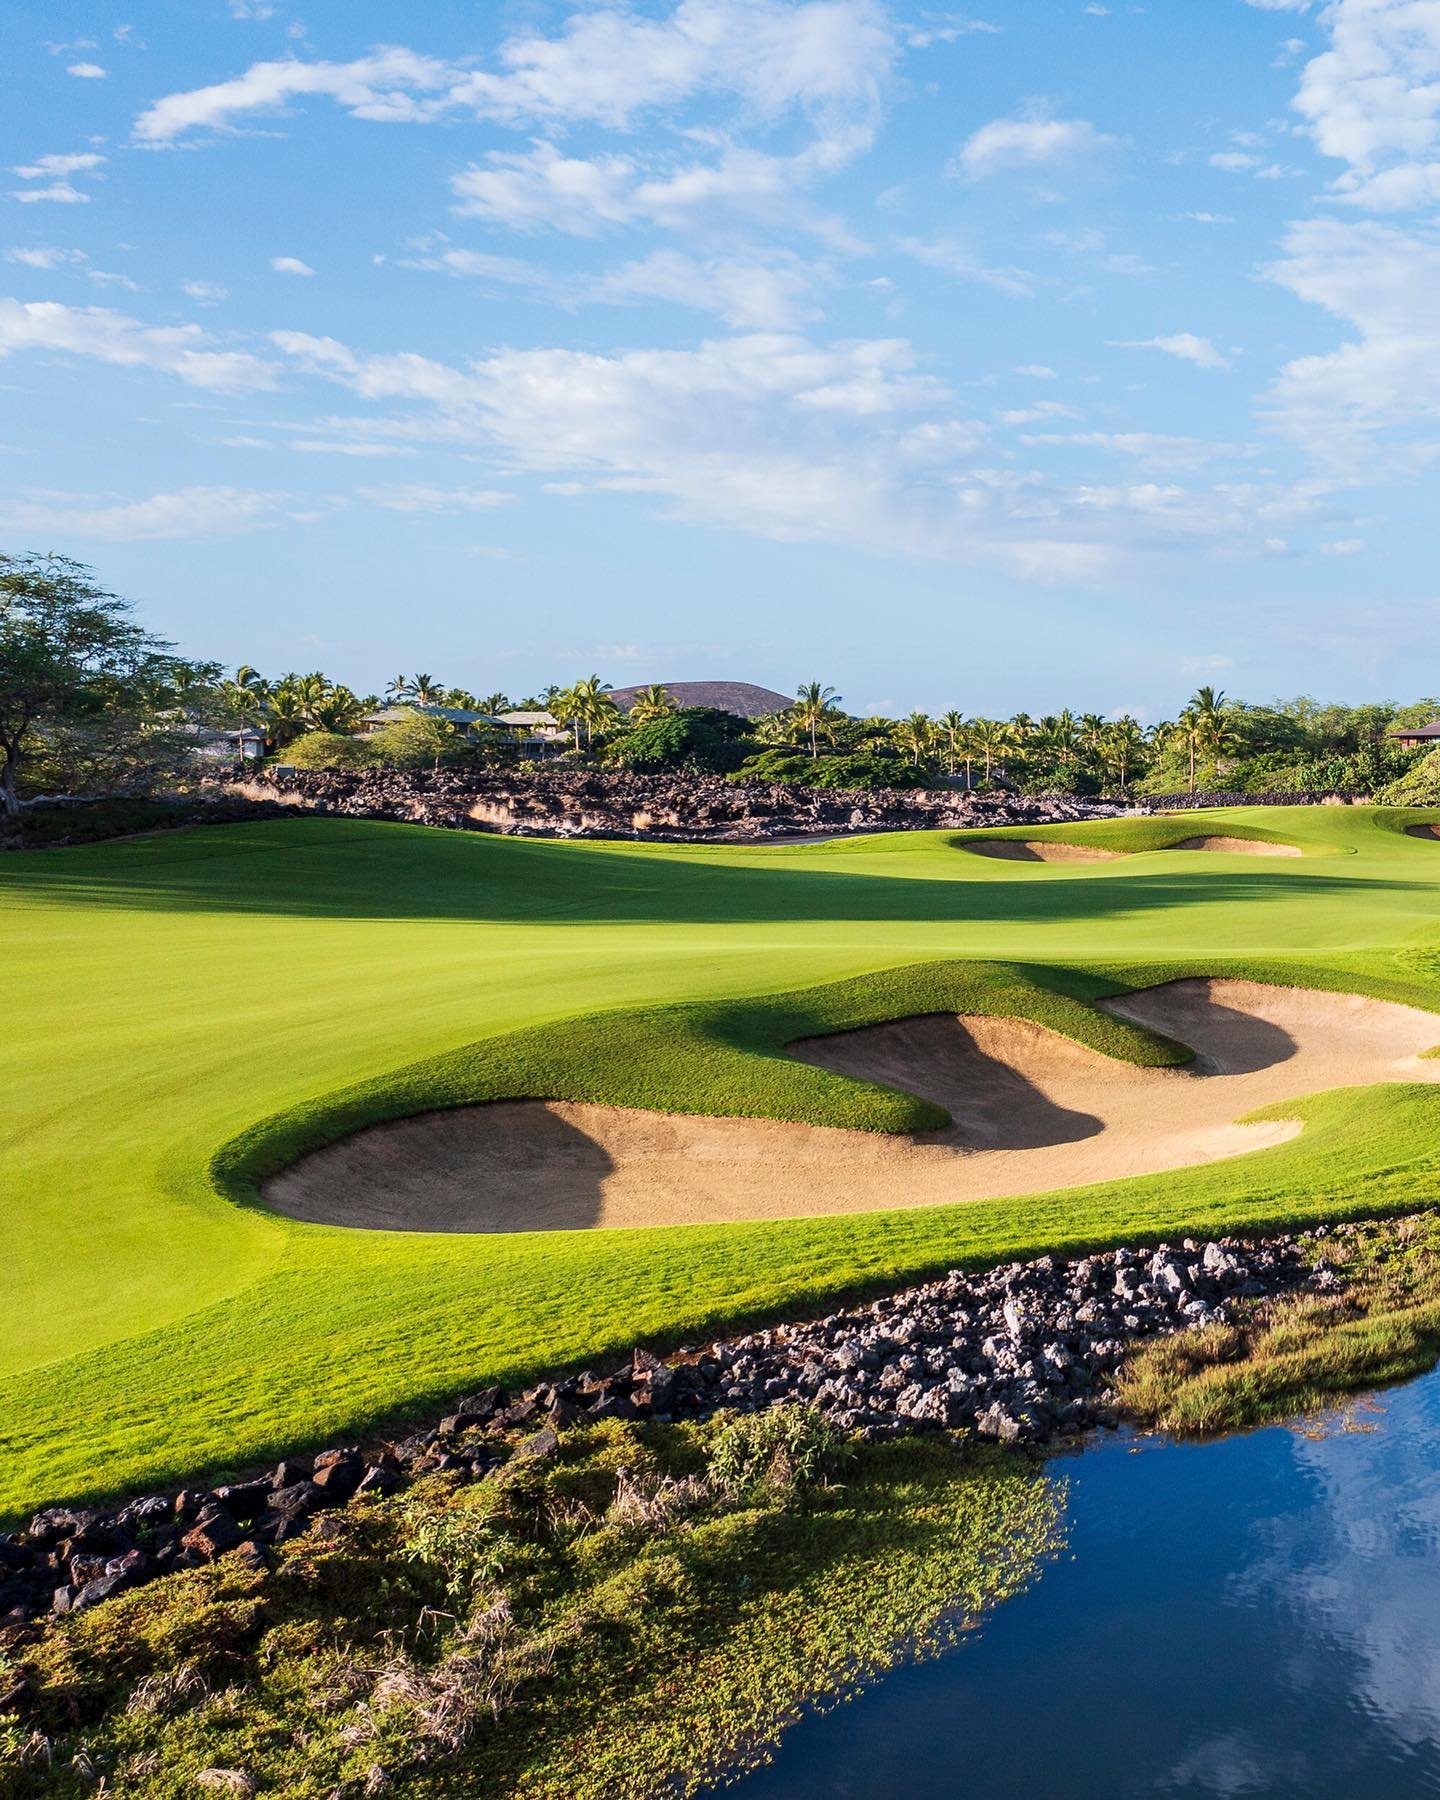 The Hualalai Resort recently hired me to photograph their newly renovated Private Members Only Ke&rsquo;olu Golf Course using Drone Aerial Photography.&nbsp; For 5 days in a row we started our day at Sunrise and captured 3 to 4 Holes each morning end